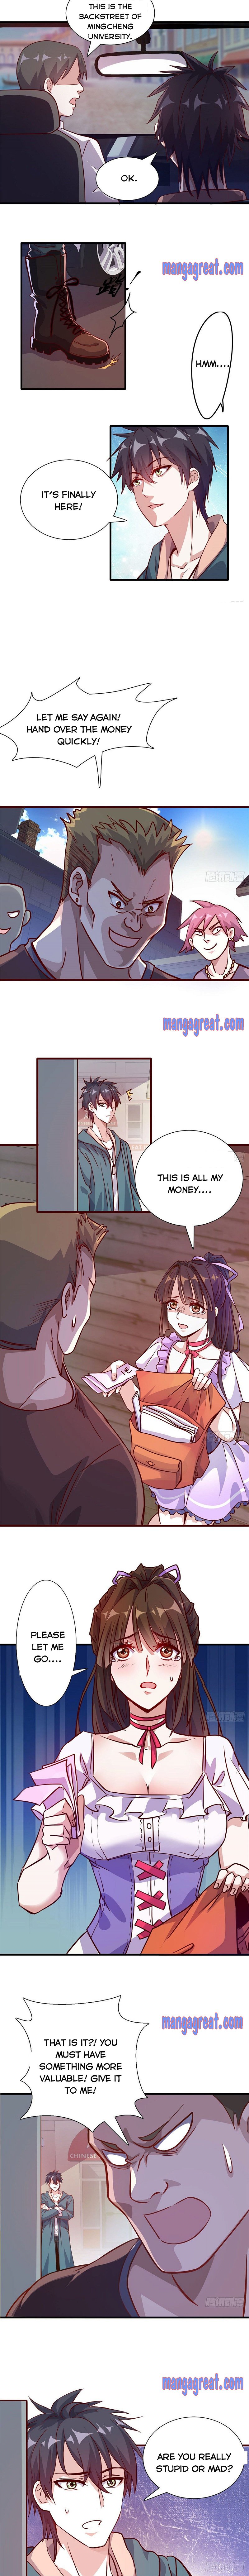 The School Beauty President Is All Over Me Chapter 2 - Page 3